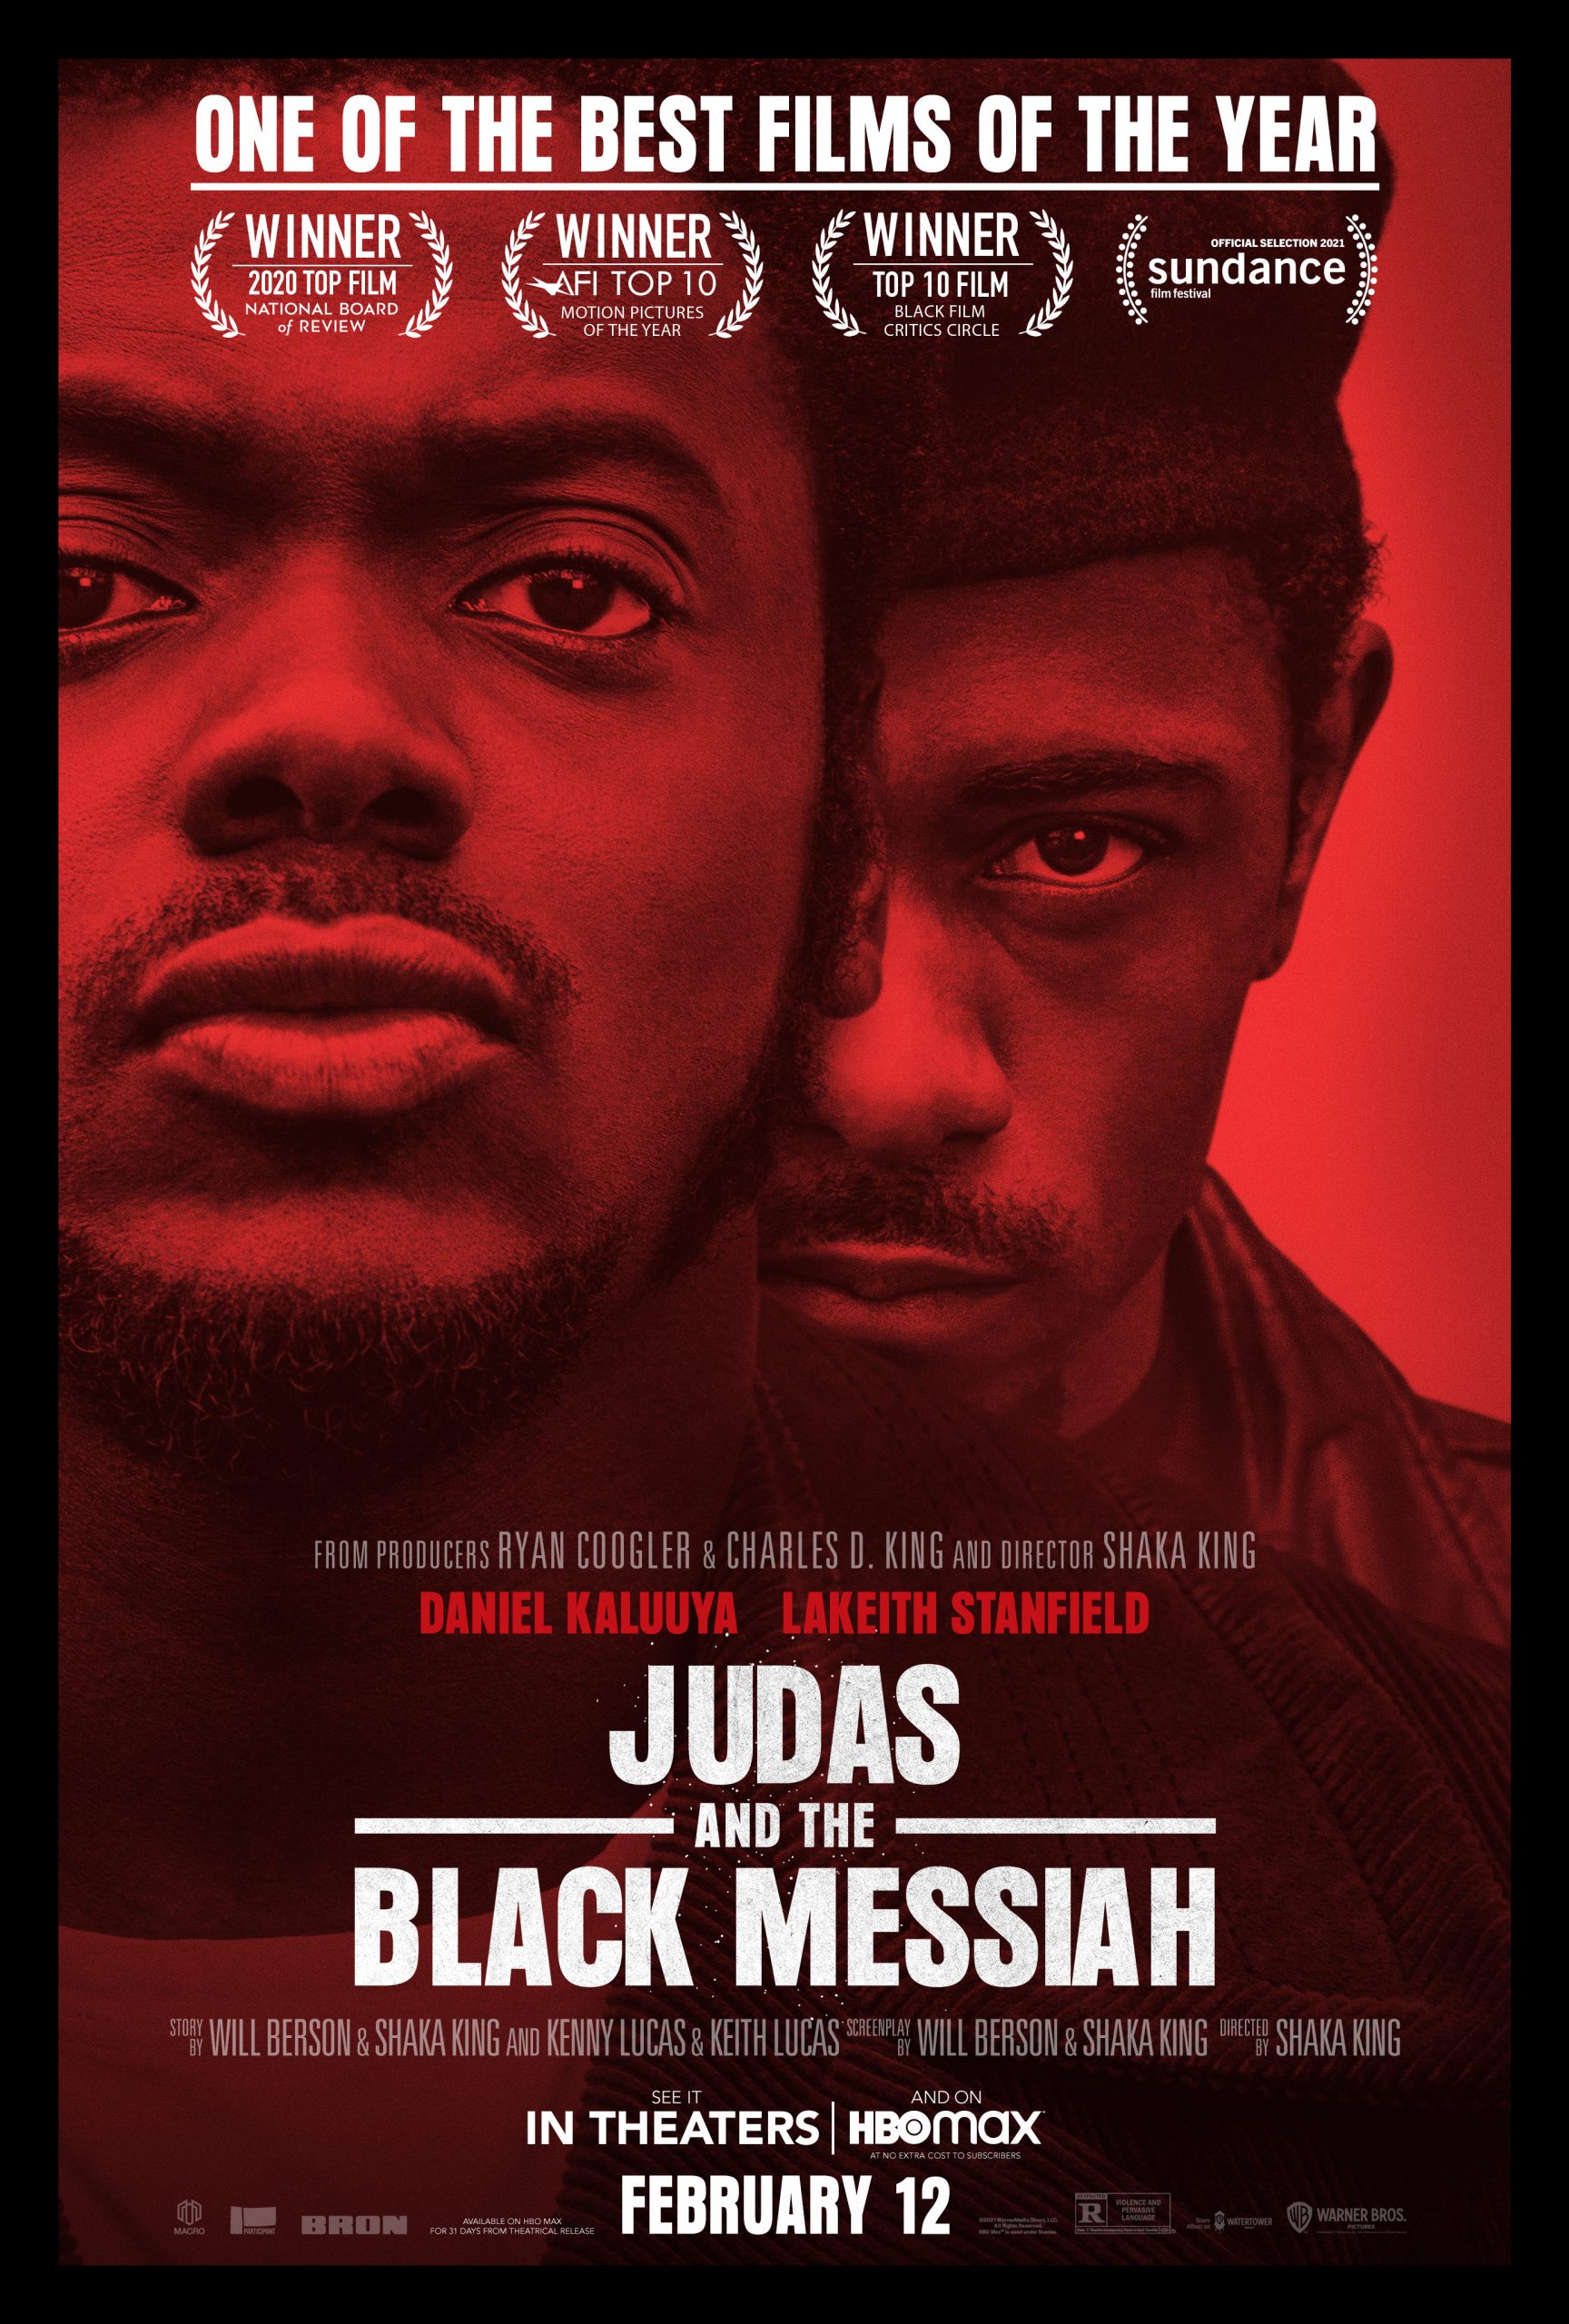 The Most Powerful Quotes From ‘JUDAS AND THE BLACK MESSIAH’